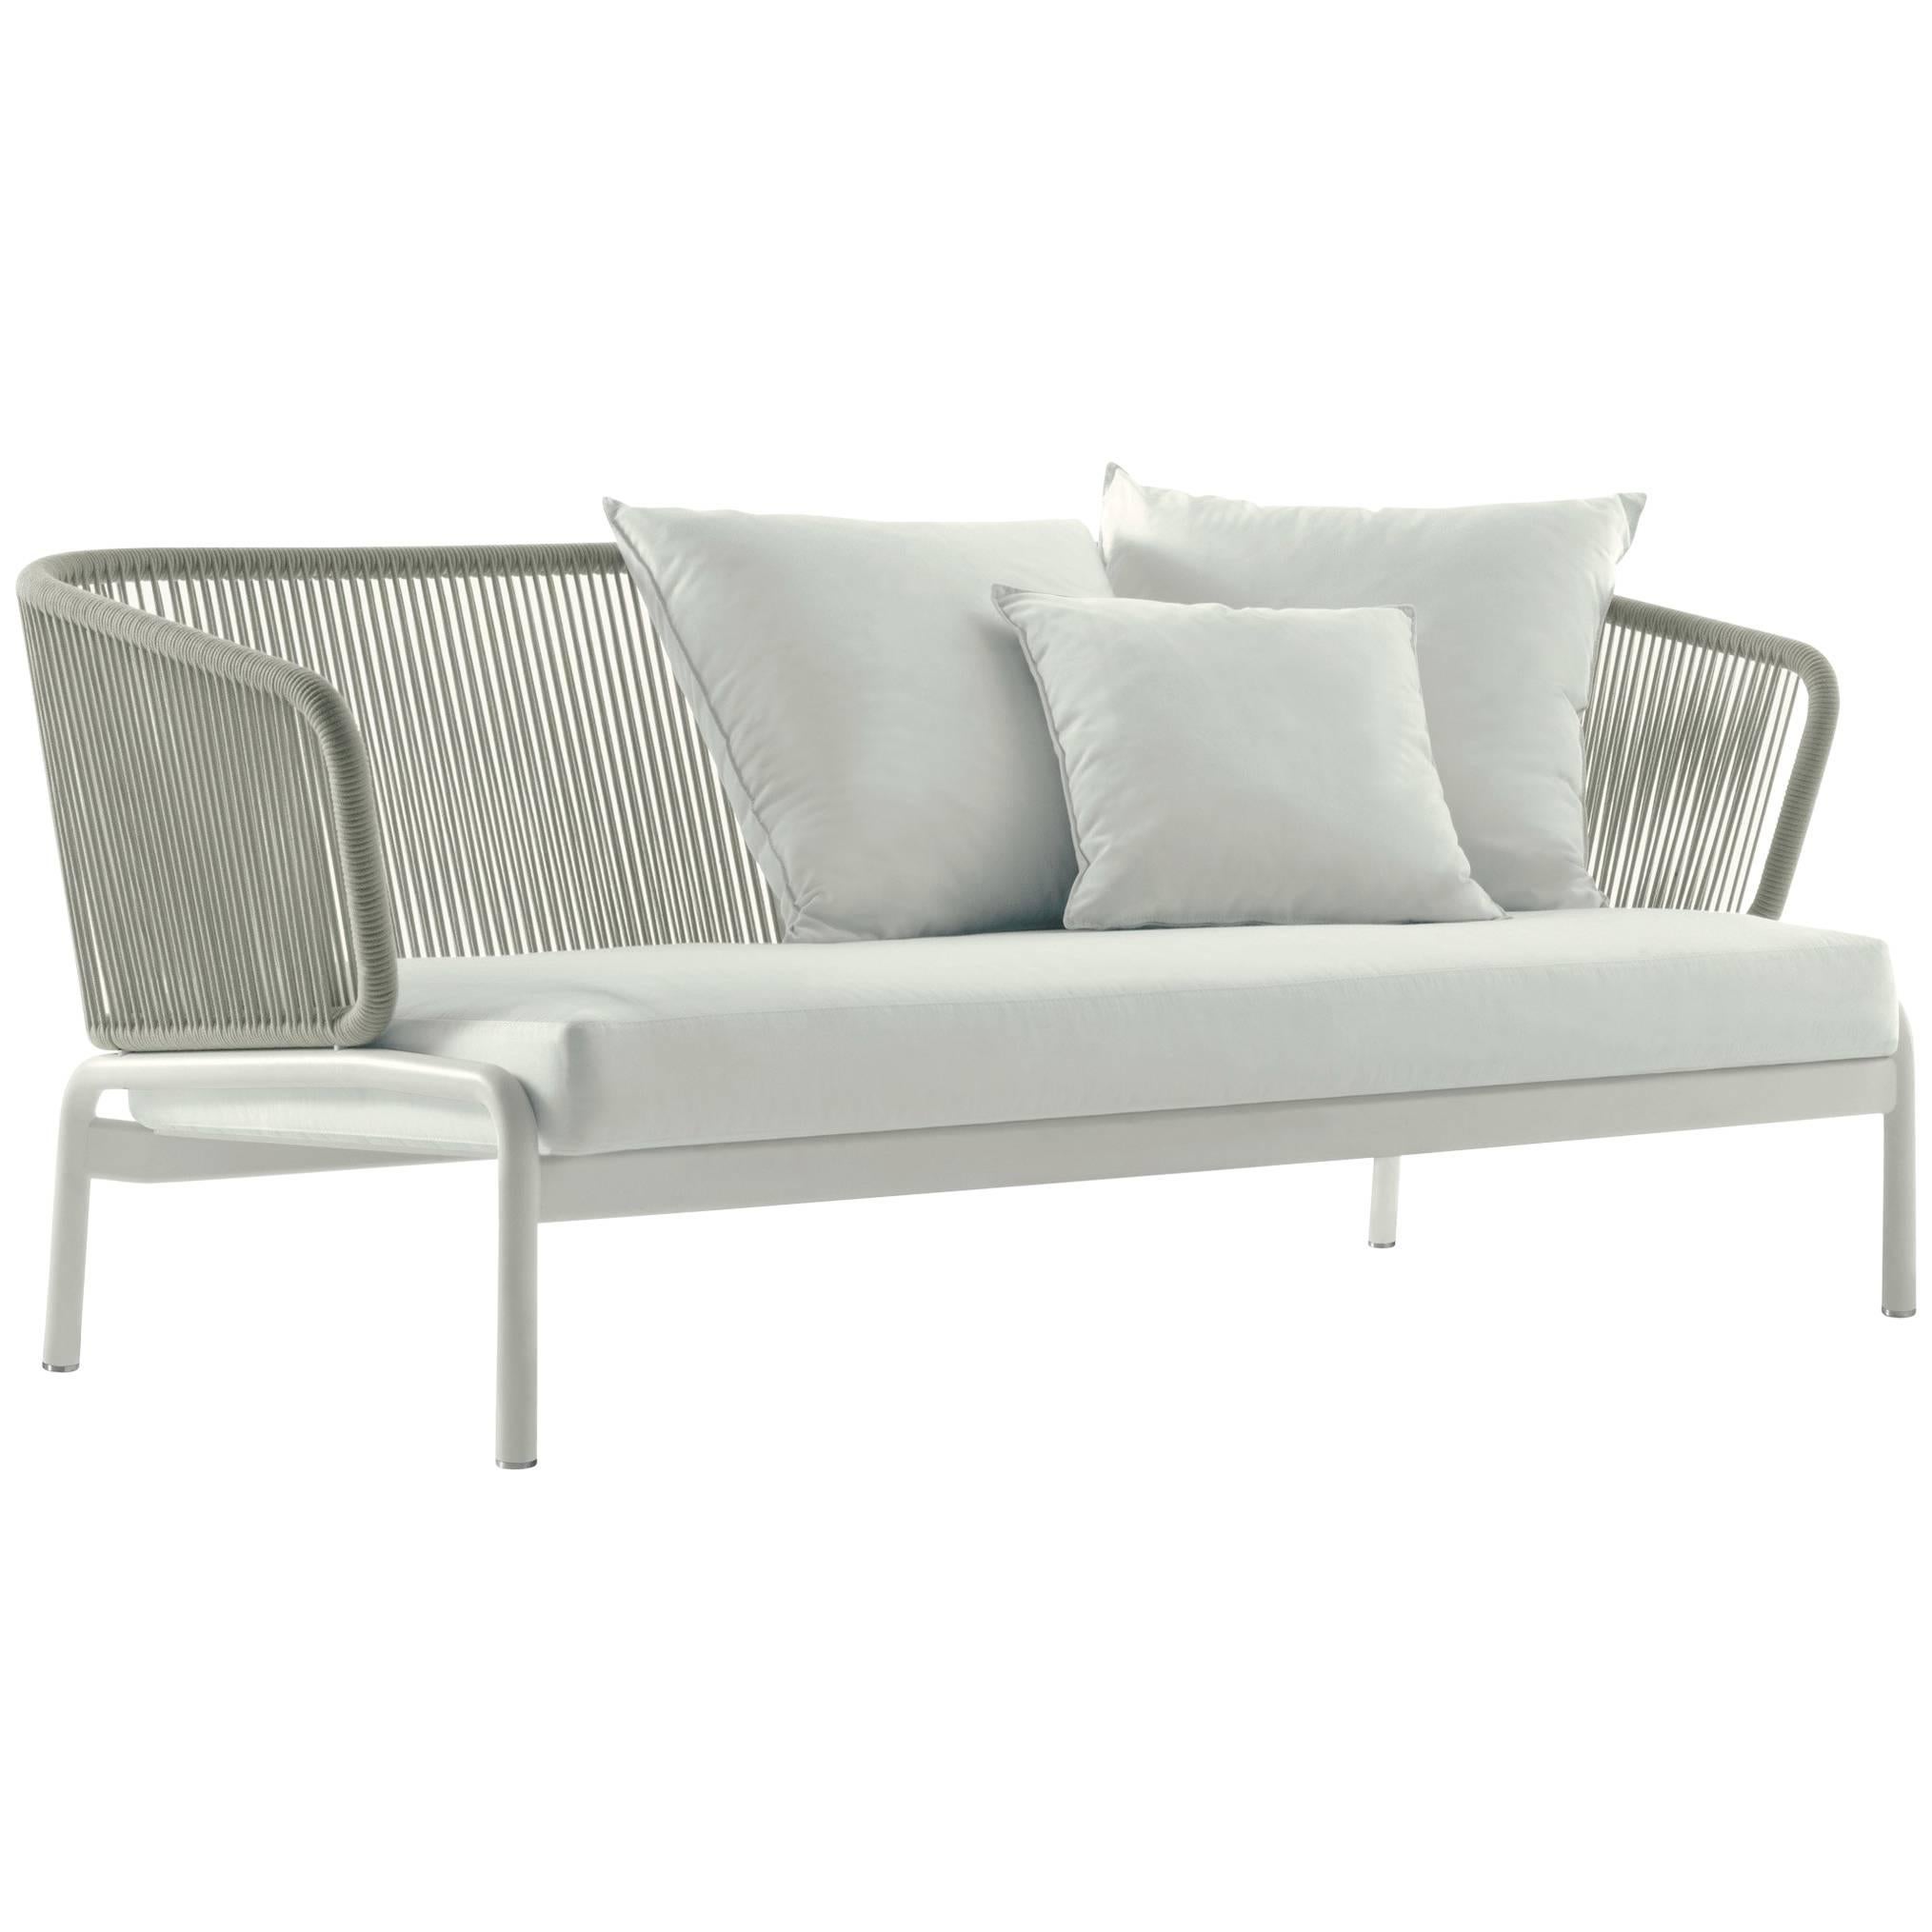 Roda Spool Two-Seat Sofa for Outdoor/Indoor Use by Rodolfo Dordoni For Sale